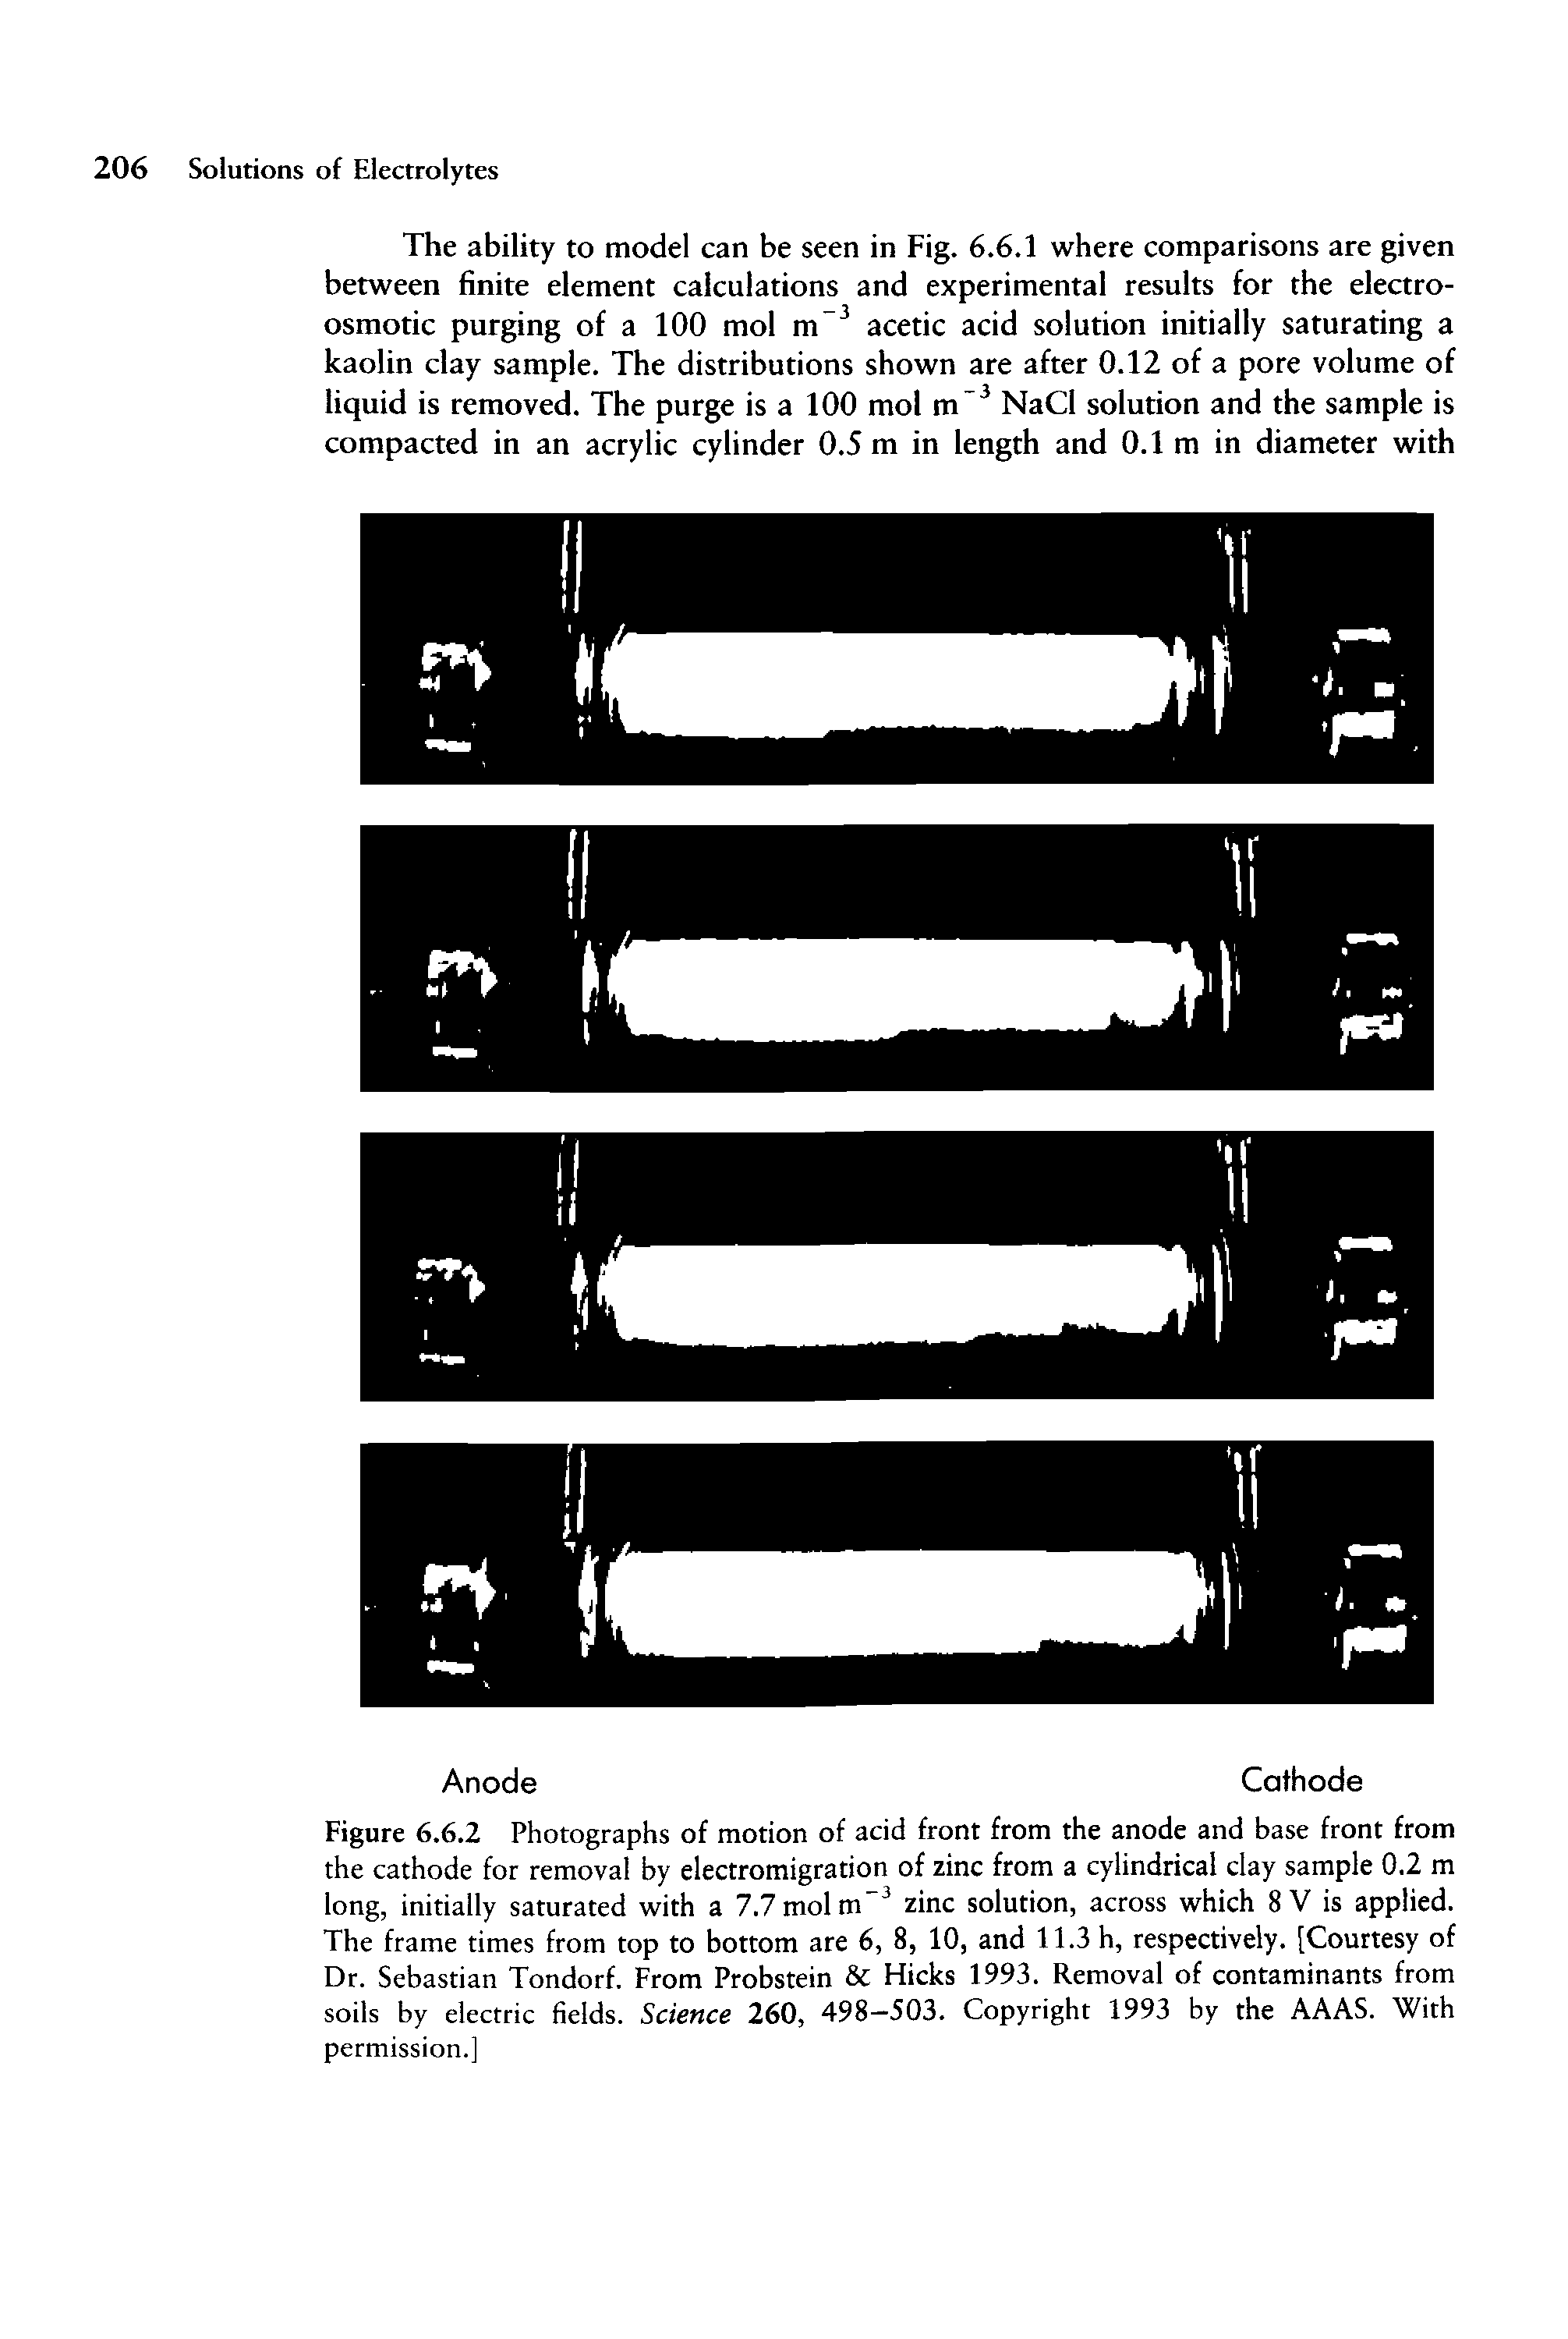 Figure 6.6.2 Photographs of motion of acid front from the anode and base front from the cathode for removal by electromigration of zinc from a cylindrical clay sample 0.2 m long, initially saturated with a 7.7 mol m" zinc solution, across which 8 V is applied. The frame times from top to bottom are 6, 8, 10, and 11.3 h, respectively. [Courtesy of Dr. Sebastian Tondorf. From Probstein Hicks 1993. Removal of contaminants from soils by electric fields. Science 260, 498—503. Copyright 1993 by the AAAS. With permission.]...